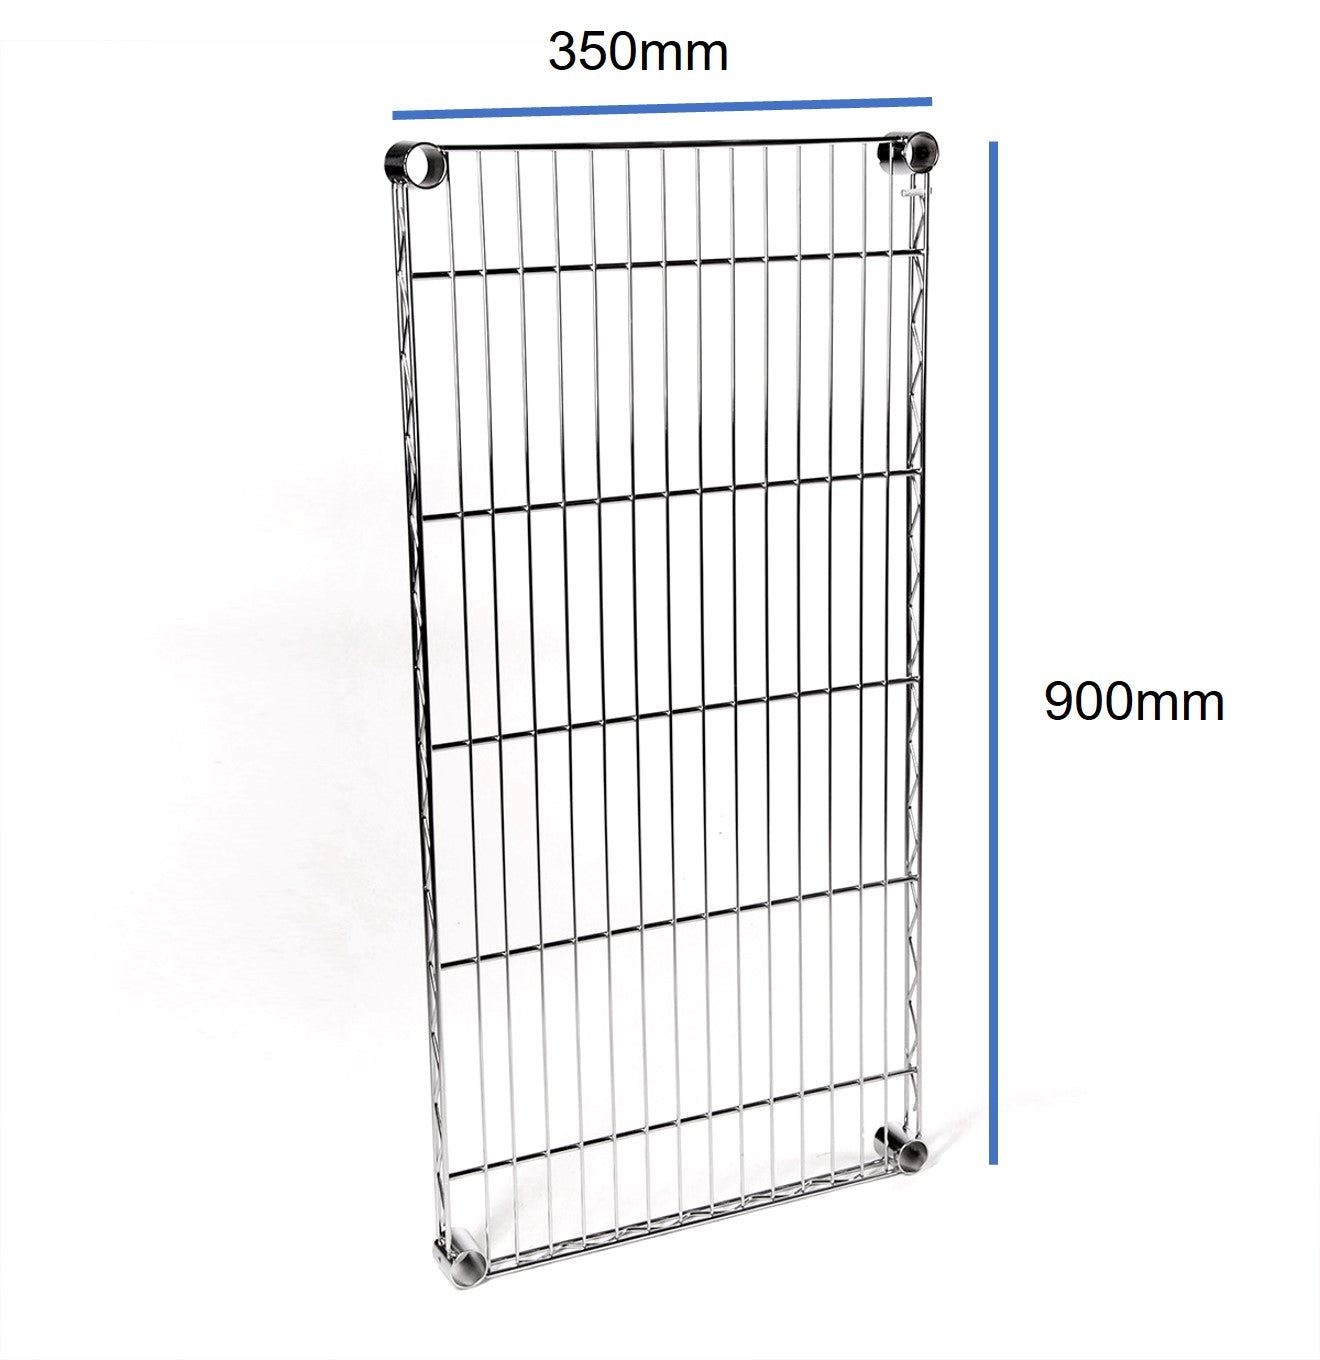 Sets with 900mm x 350mm Shelves